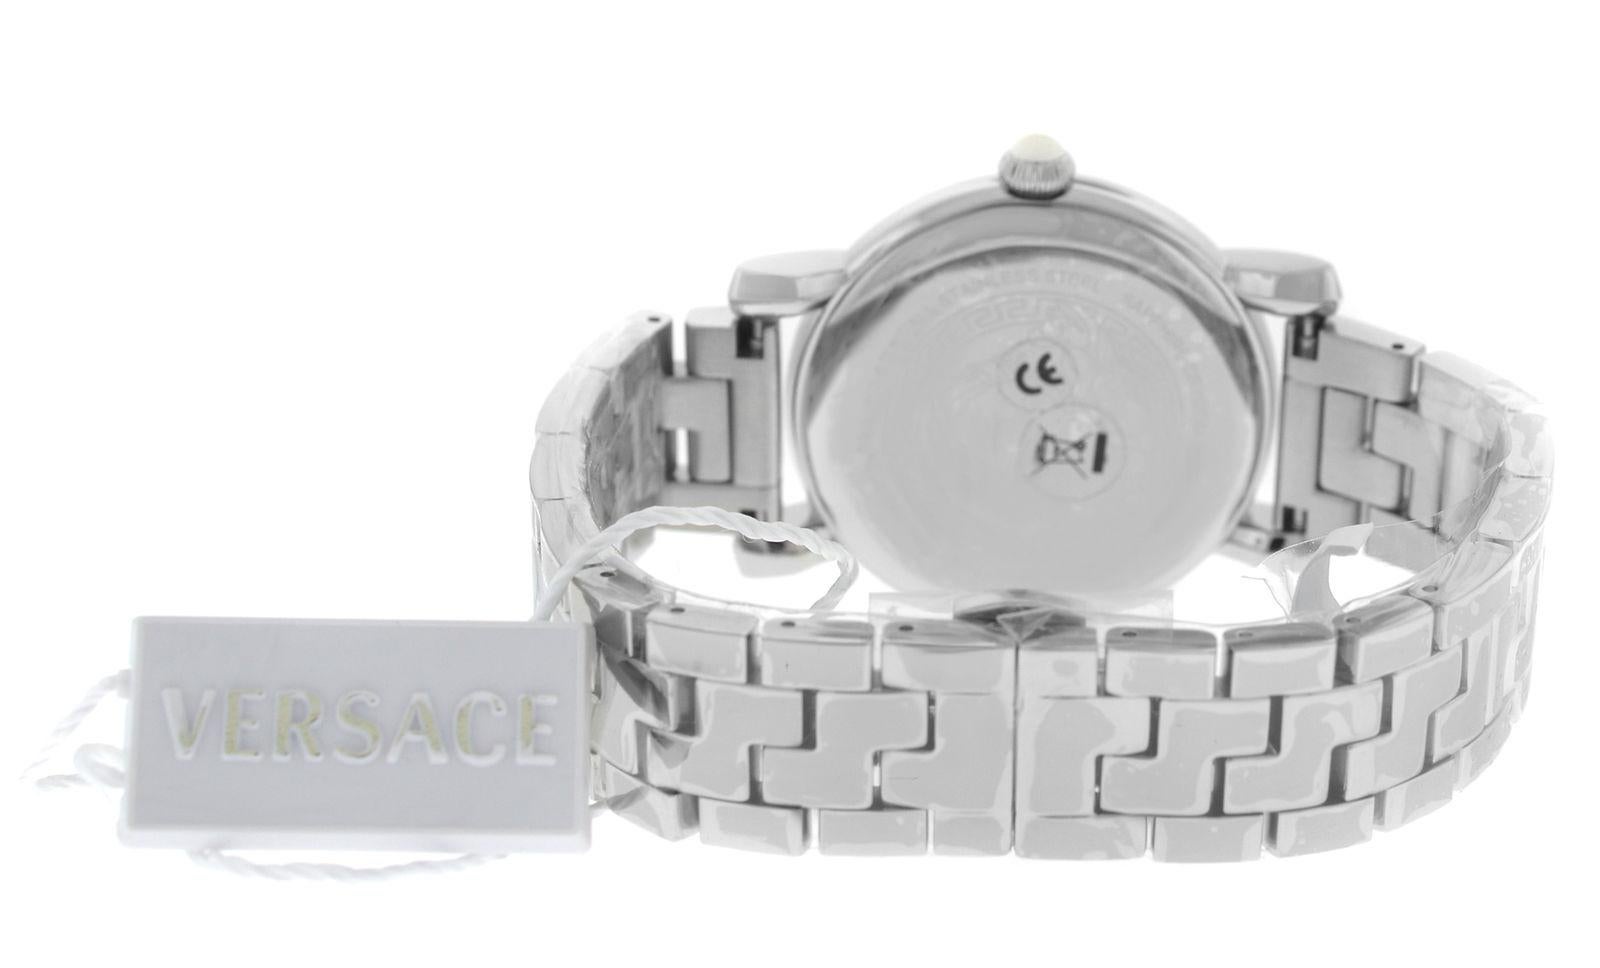 Brand	Versace
Model	Day Glam 
Gender	Ladies
Condition	New
Movement	Swiss Quartz
Case Material	Stainless Steel 
Bracelet / Strap Material	
Stainless Steel

Clasp / Buckle Material	
Stainless Steel

Clasp Type	Butterfly deployment
Bracelet / Strap